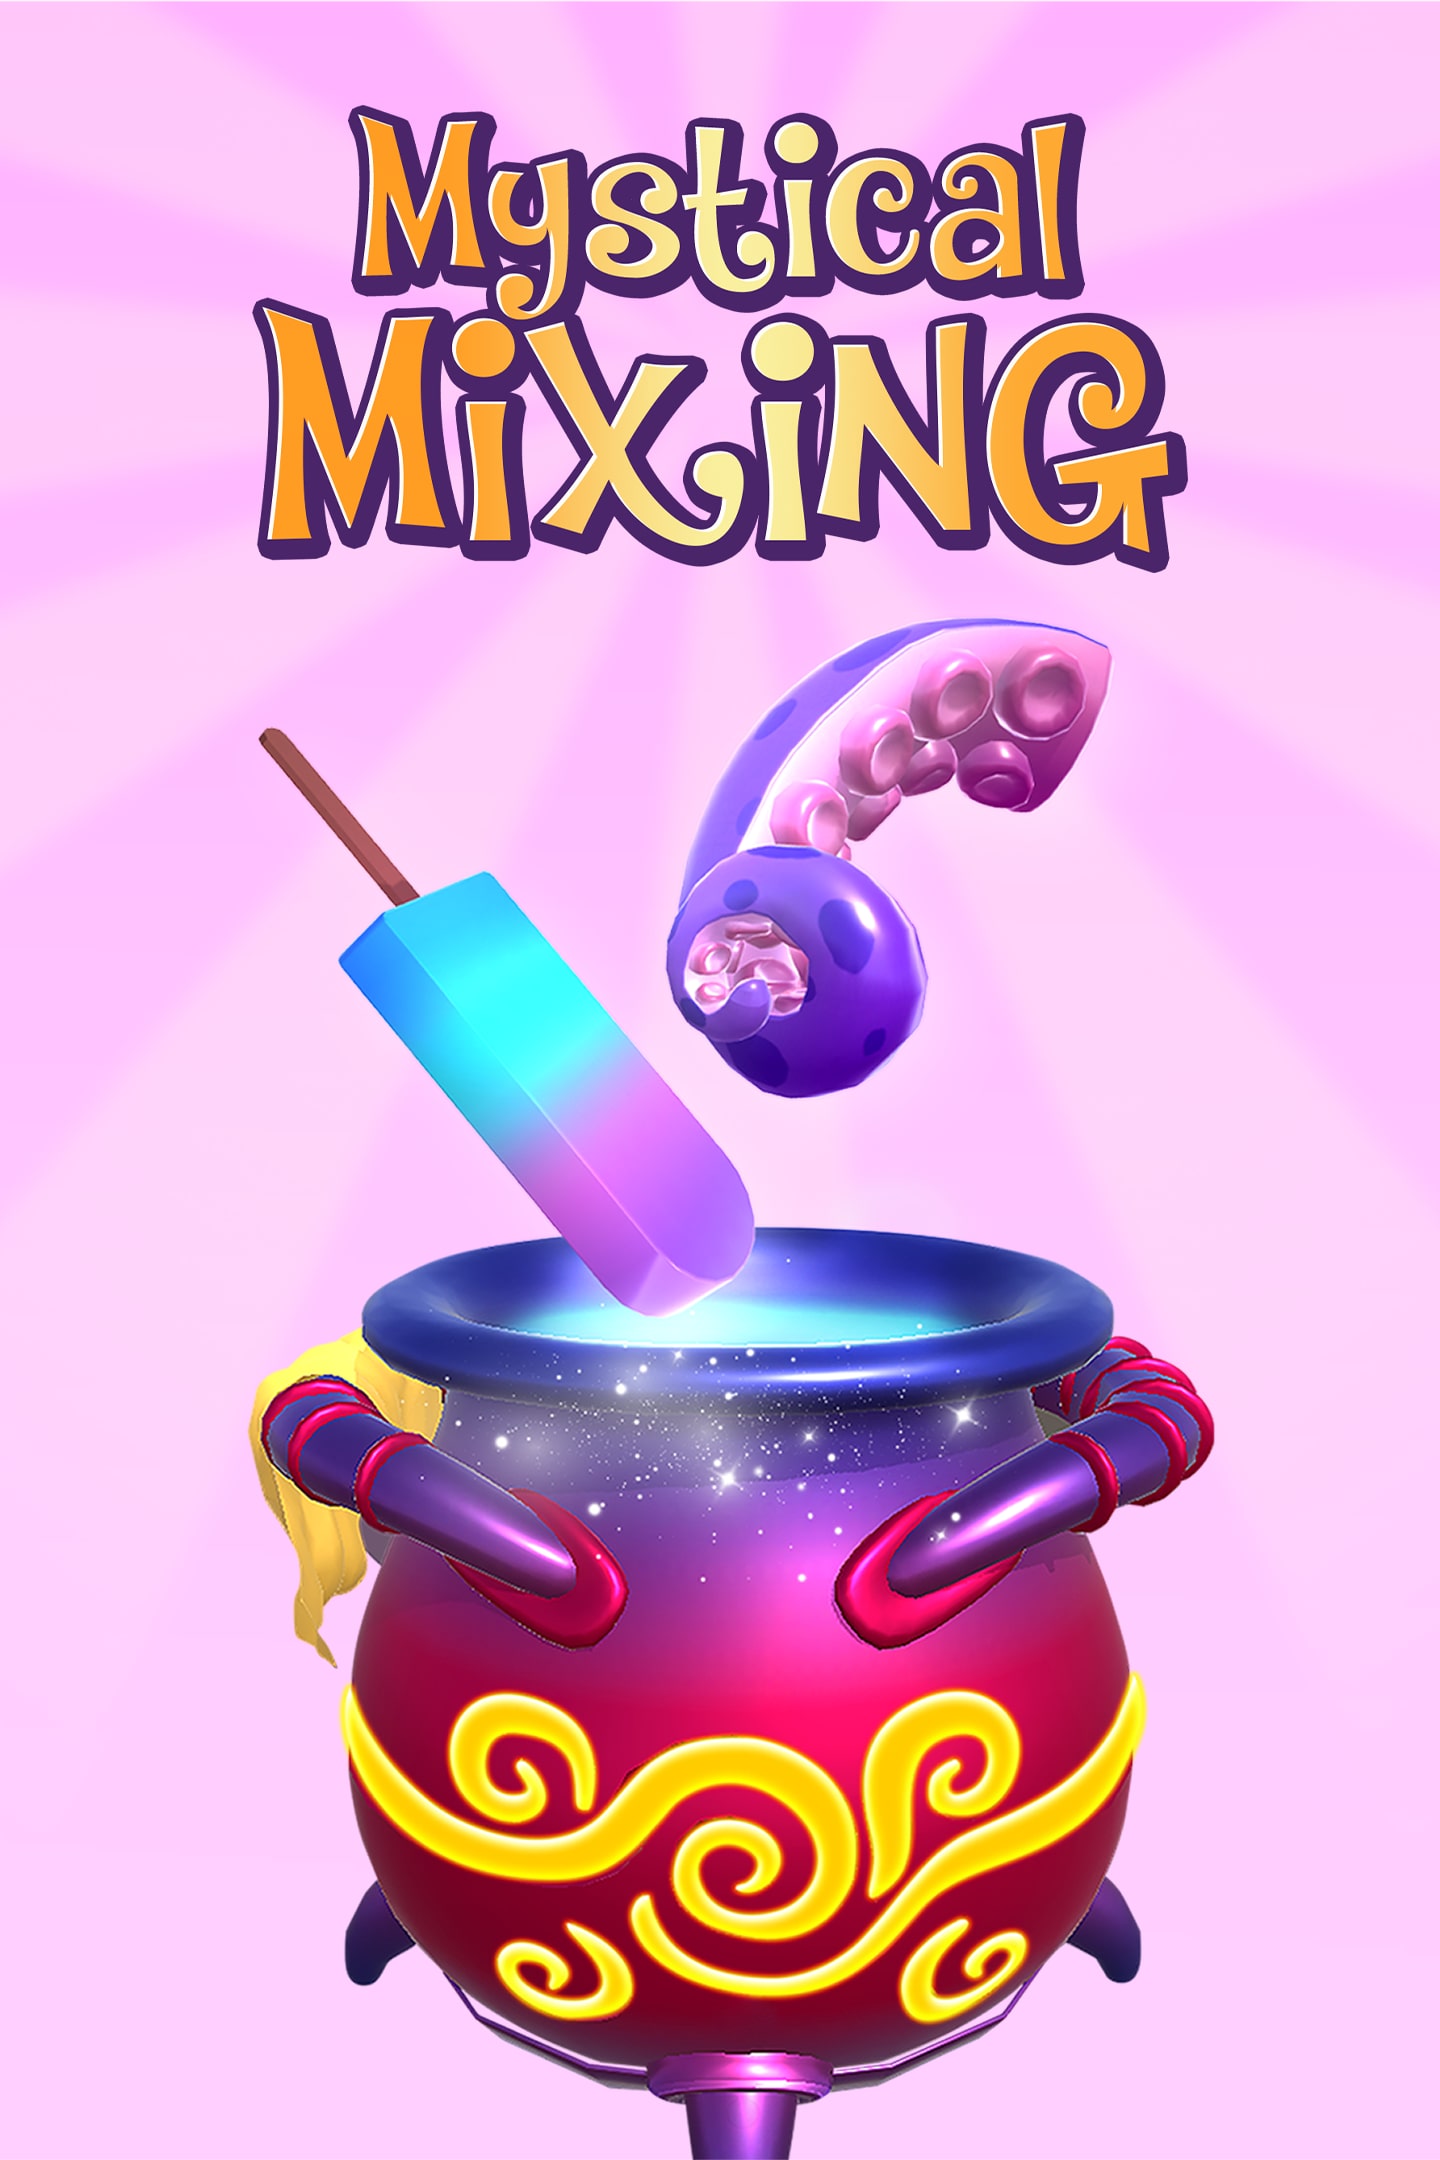 Mystical Mixing: Wand and Frog PS4 — buy online and track price history —  PS Deals USA